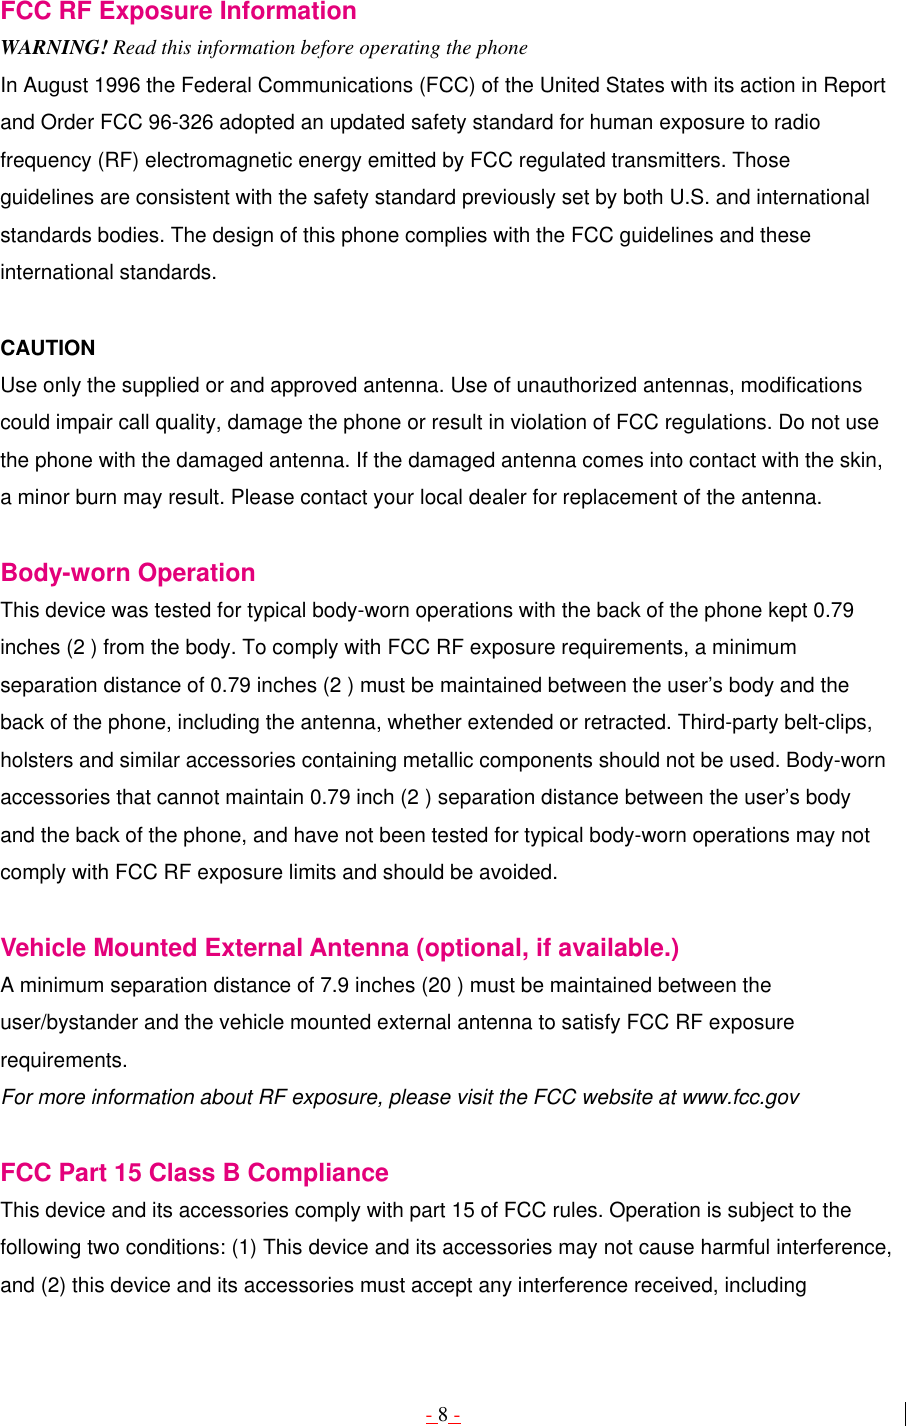 - 8 -  FCC RF Exposure Information WARNING! Read this information before operating the phone In August 1996 the Federal Communications (FCC) of the United States with its action in Report and Order FCC 96-326 adopted an updated safety standard for human exposure to radio frequency (RF) electromagnetic energy emitted by FCC regulated transmitters. Those guidelines are consistent with the safety standard previously set by both U.S. and international standards bodies. The design of this phone complies with the FCC guidelines and these international standards.  CAUTION Use only the supplied or and approved antenna. Use of unauthorized antennas, modifications could impair call quality, damage the phone or result in violation of FCC regulations. Do not use the phone with the damaged antenna. If the damaged antenna comes into contact with the skin, a minor burn may result. Please contact your local dealer for replacement of the antenna.  Body-worn Operation This device was tested for typical body-worn operations with the back of the phone kept 0.79 inches (2 ) from the body. To comply with FCC RF exposure requirements, a minimum separation distance of 0.79 inches (2 ) must be maintained between the user’s body and the back of the phone, including the antenna, whether extended or retracted. Third-party belt-clips, holsters and similar accessories containing metallic components should not be used. Body-worn accessories that cannot maintain 0.79 inch (2 ) separation distance between the user’s body and the back of the phone, and have not been tested for typical body-worn operations may not comply with FCC RF exposure limits and should be avoided.  Vehicle Mounted External Antenna (optional, if available.) A minimum separation distance of 7.9 inches (20 ) must be maintained between the user/bystander and the vehicle mounted external antenna to satisfy FCC RF exposure requirements. For more information about RF exposure, please visit the FCC website at www.fcc.gov  FCC Part 15 Class B Compliance This device and its accessories comply with part 15 of FCC rules. Operation is subject to the following two conditions: (1) This device and its accessories may not cause harmful interference, and (2) this device and its accessories must accept any interference received, including 